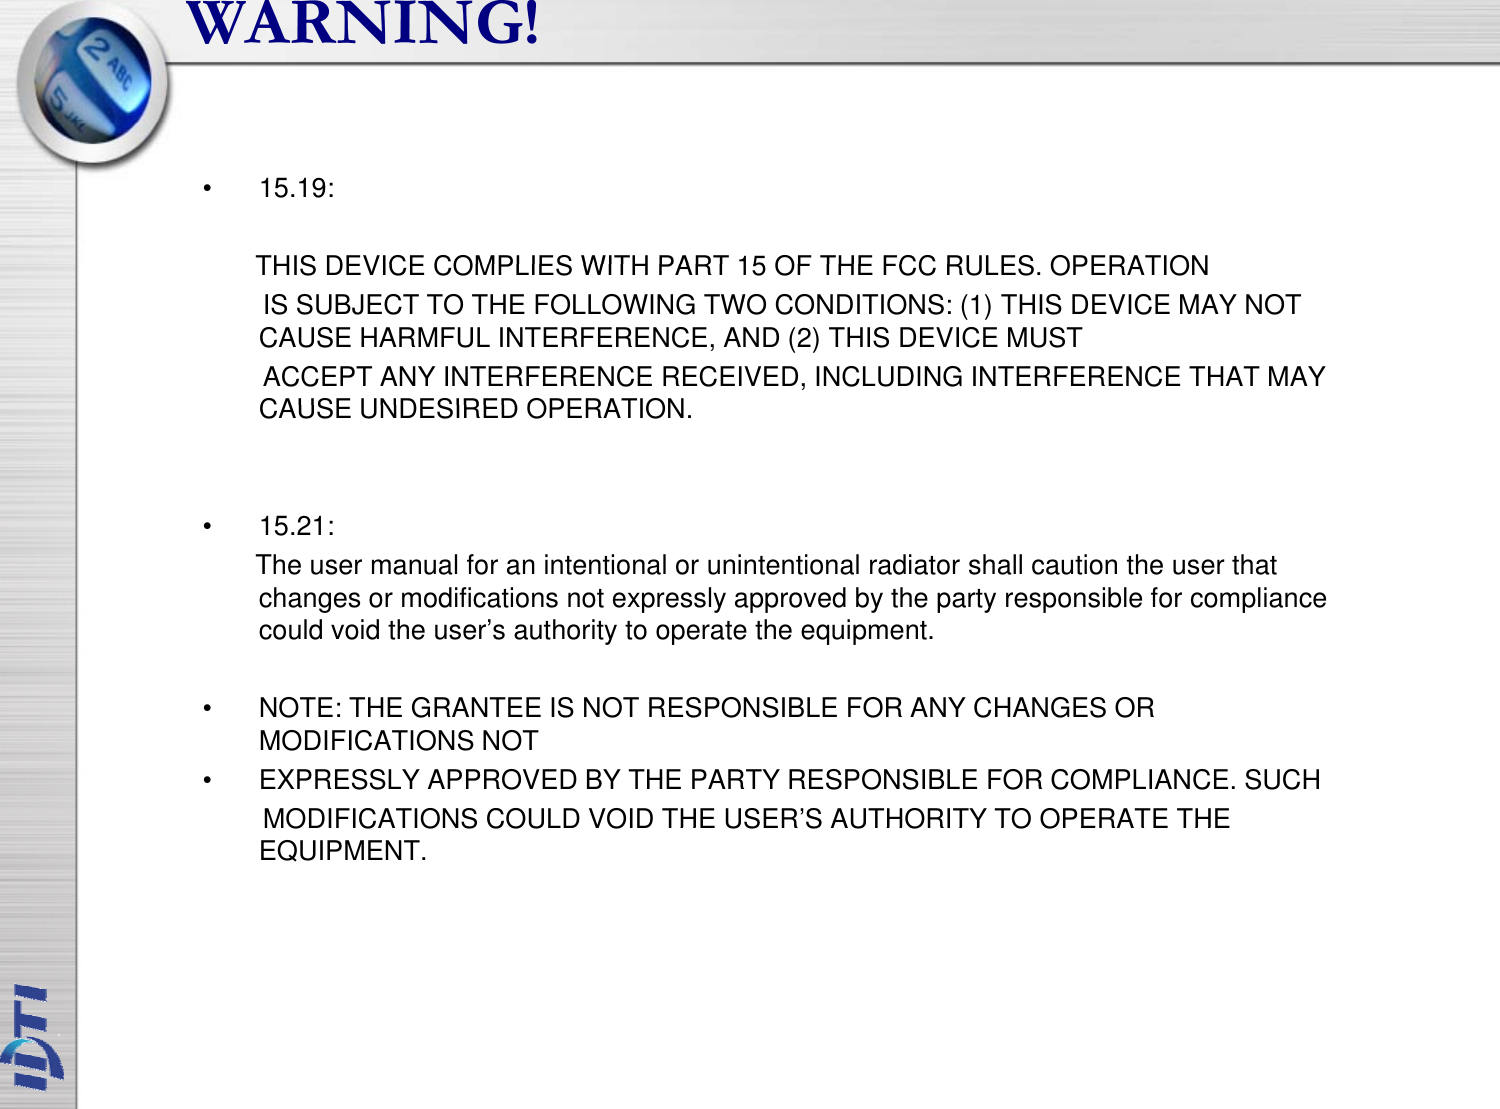 WARNING!• 15.19: THISDEVICE COMPLIES WITH PART 15 OF THE FCC RULES OPERATIONTHIS DEVICE COMPLIES WITH PART 15 OF THE FCC RULES. OPERATIONIS SUBJECT TO THE FOLLOWING TWO CONDITIONS: (1) THIS DEVICE MAY NOT CAUSE HARMFUL INTERFERENCE, AND (2) THIS DEVICE MUST ACCEPT ANY INTERFERENCE RECEIVED, INCLUDING INTERFERENCE THAT MAY CAUSE UNDESIRED OPERATIONCAUSE UNDESIRED OPERATION.• 15.21:The user manual for an intentional or unintentional radiator shall caution the user that changes or modifications not expressly approved by the party responsible for compliance could void the user’s authority to operate the equipment. • NOTE: THE GRANTEE IS NOT RESPONSIBLE FOR ANY CHANGES OR MODIFICATIONS NOT• EXPRESSLY APPROVED BY THE PARTY RESPONSIBLE FOR COMPLIANCE. SUCHMODIFICATIONSCOULD VOID THE USER’S AUTHORITY TO OPERATE THEMODIFICATIONS COULD VOID THE USER S AUTHORITY TO OPERATE THE EQUIPMENT.